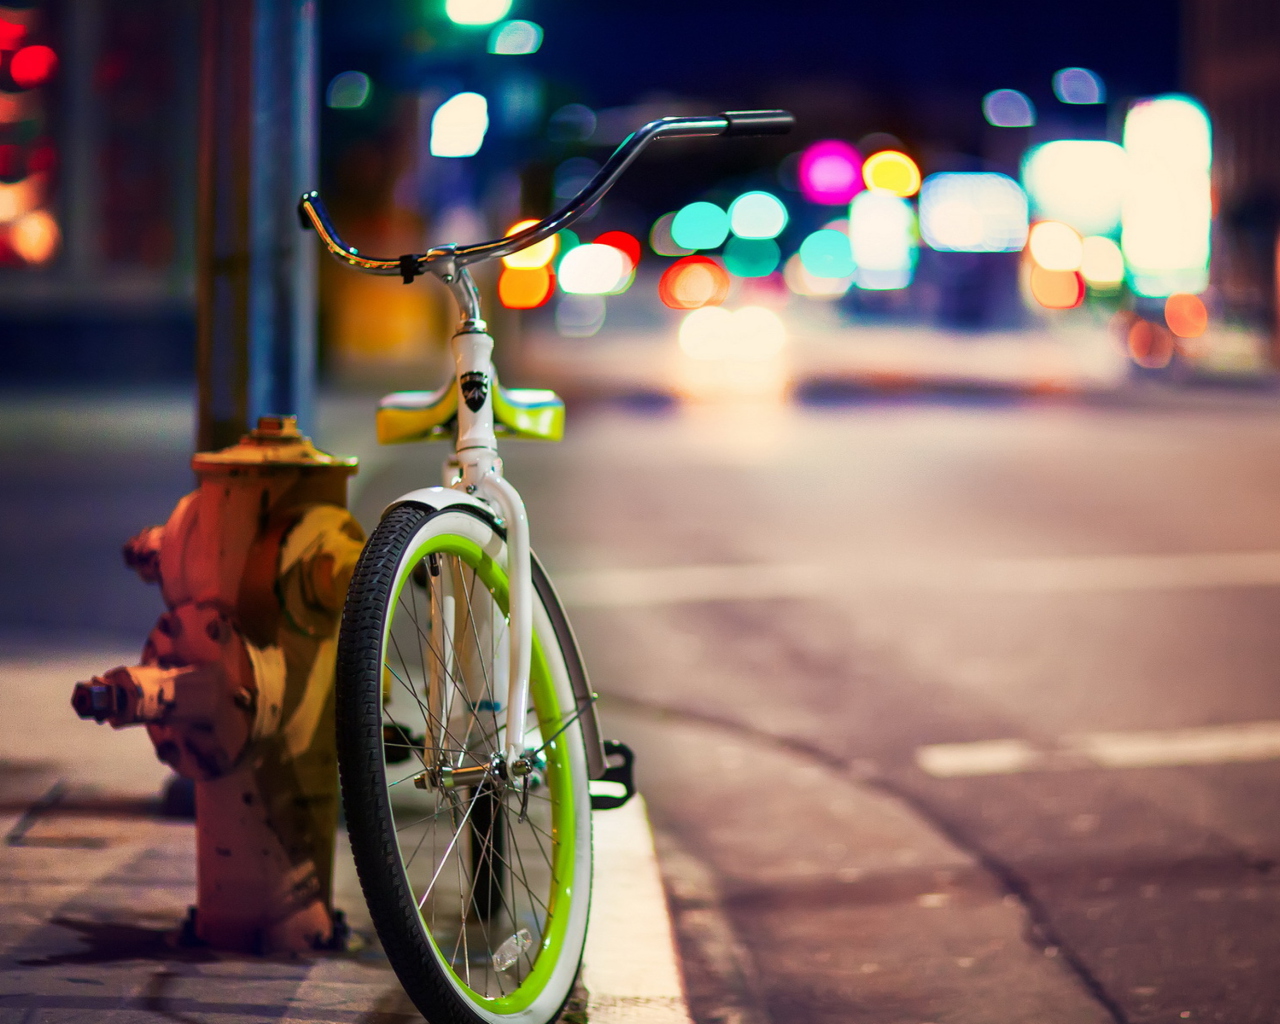 Green Bicycle In City Lights wallpaper 1280x1024